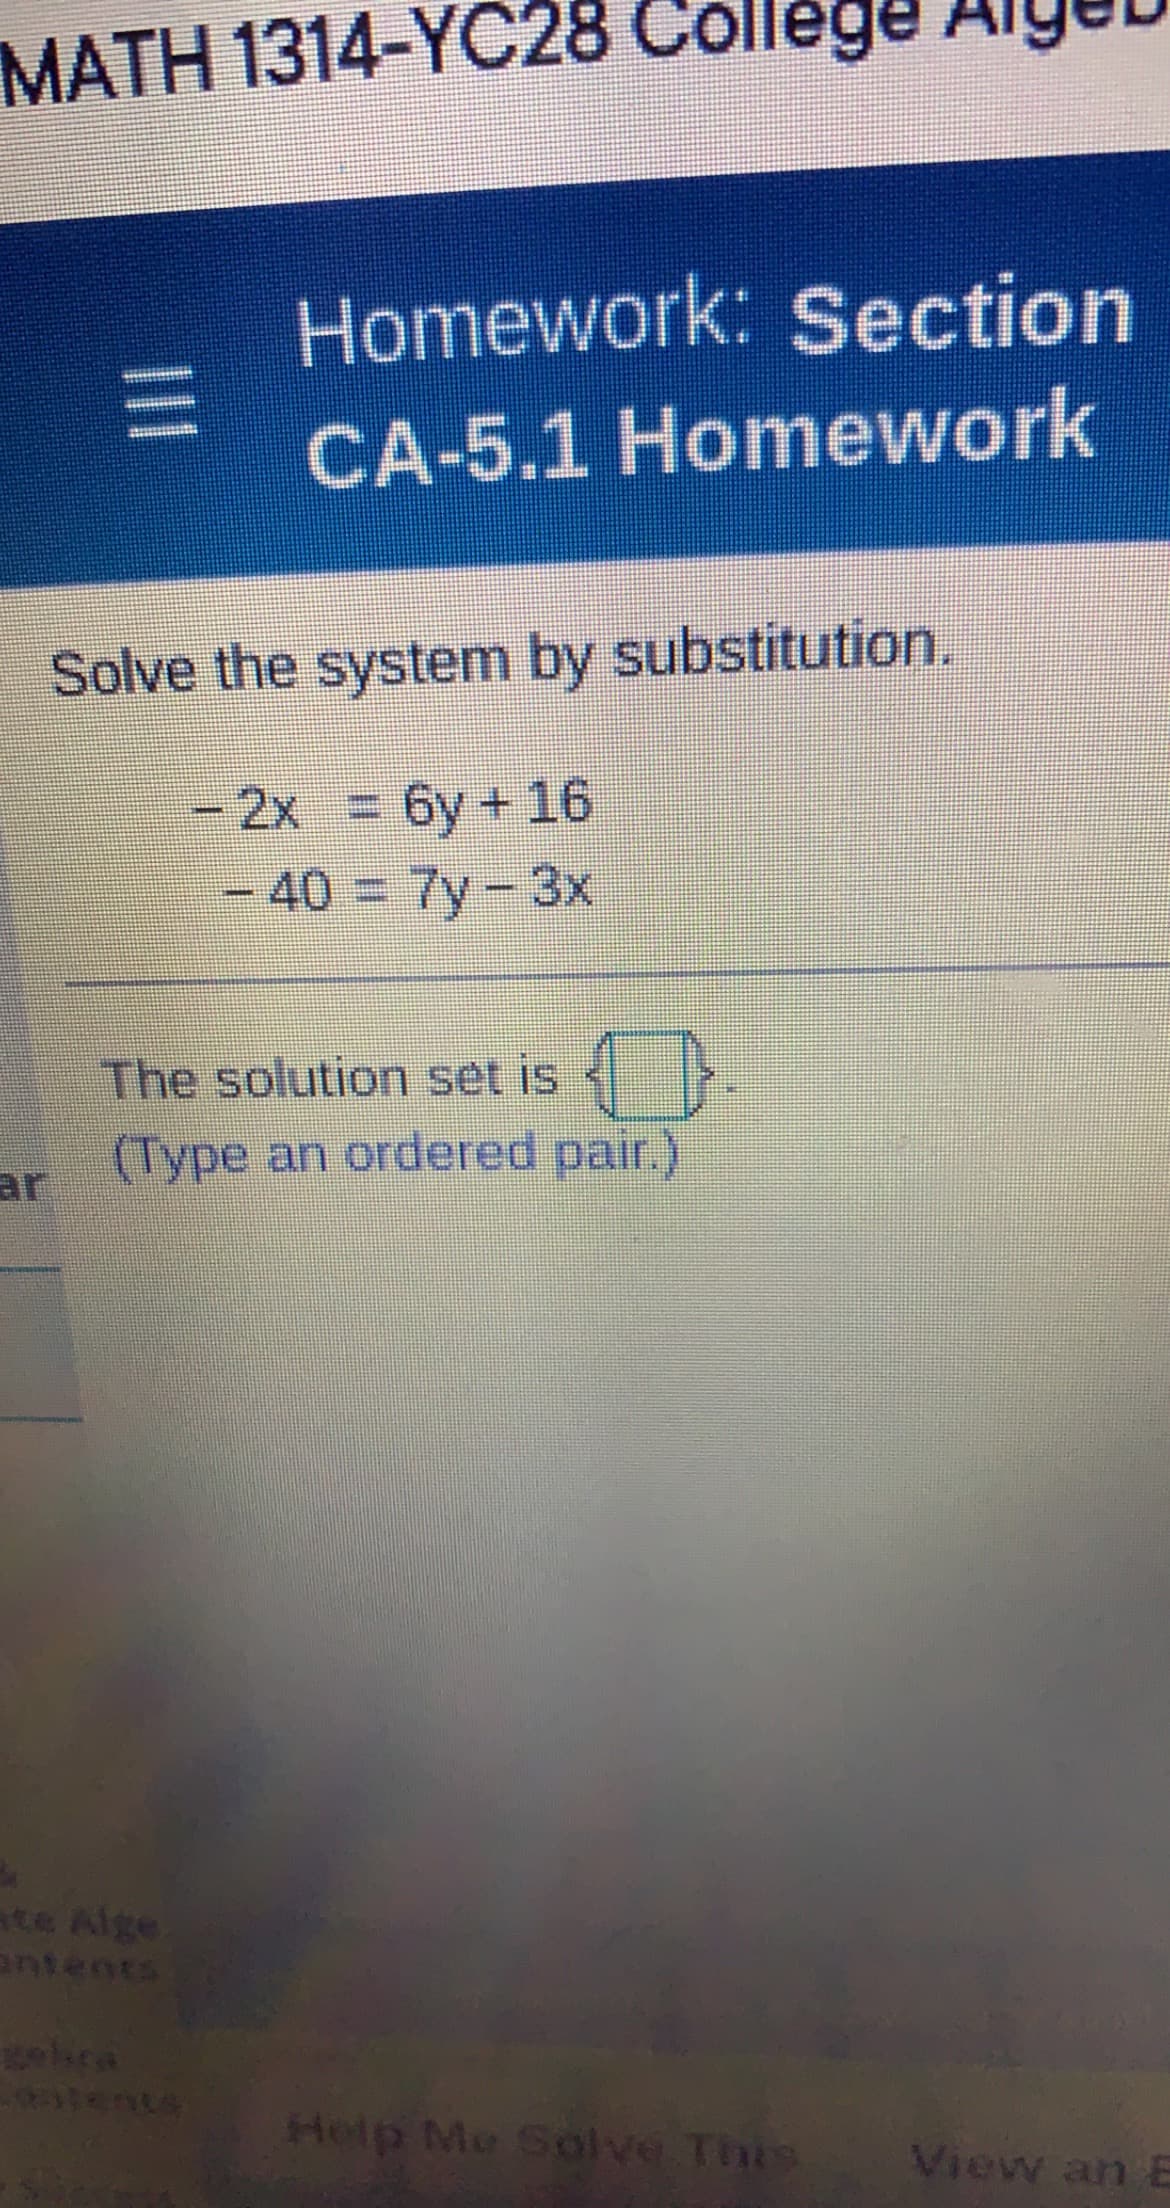 MATH 1314-YC28 College Aige
Homework: Section
CA-5.1 Homework
Solve the system by substitution.
2x = 6y+ 16
- 40 = 7y-3x
%3D
The solution set is <>
ar
r (Type an ordered pair.)
ate Alge
antents
Help Me Solve This
View an E
II
